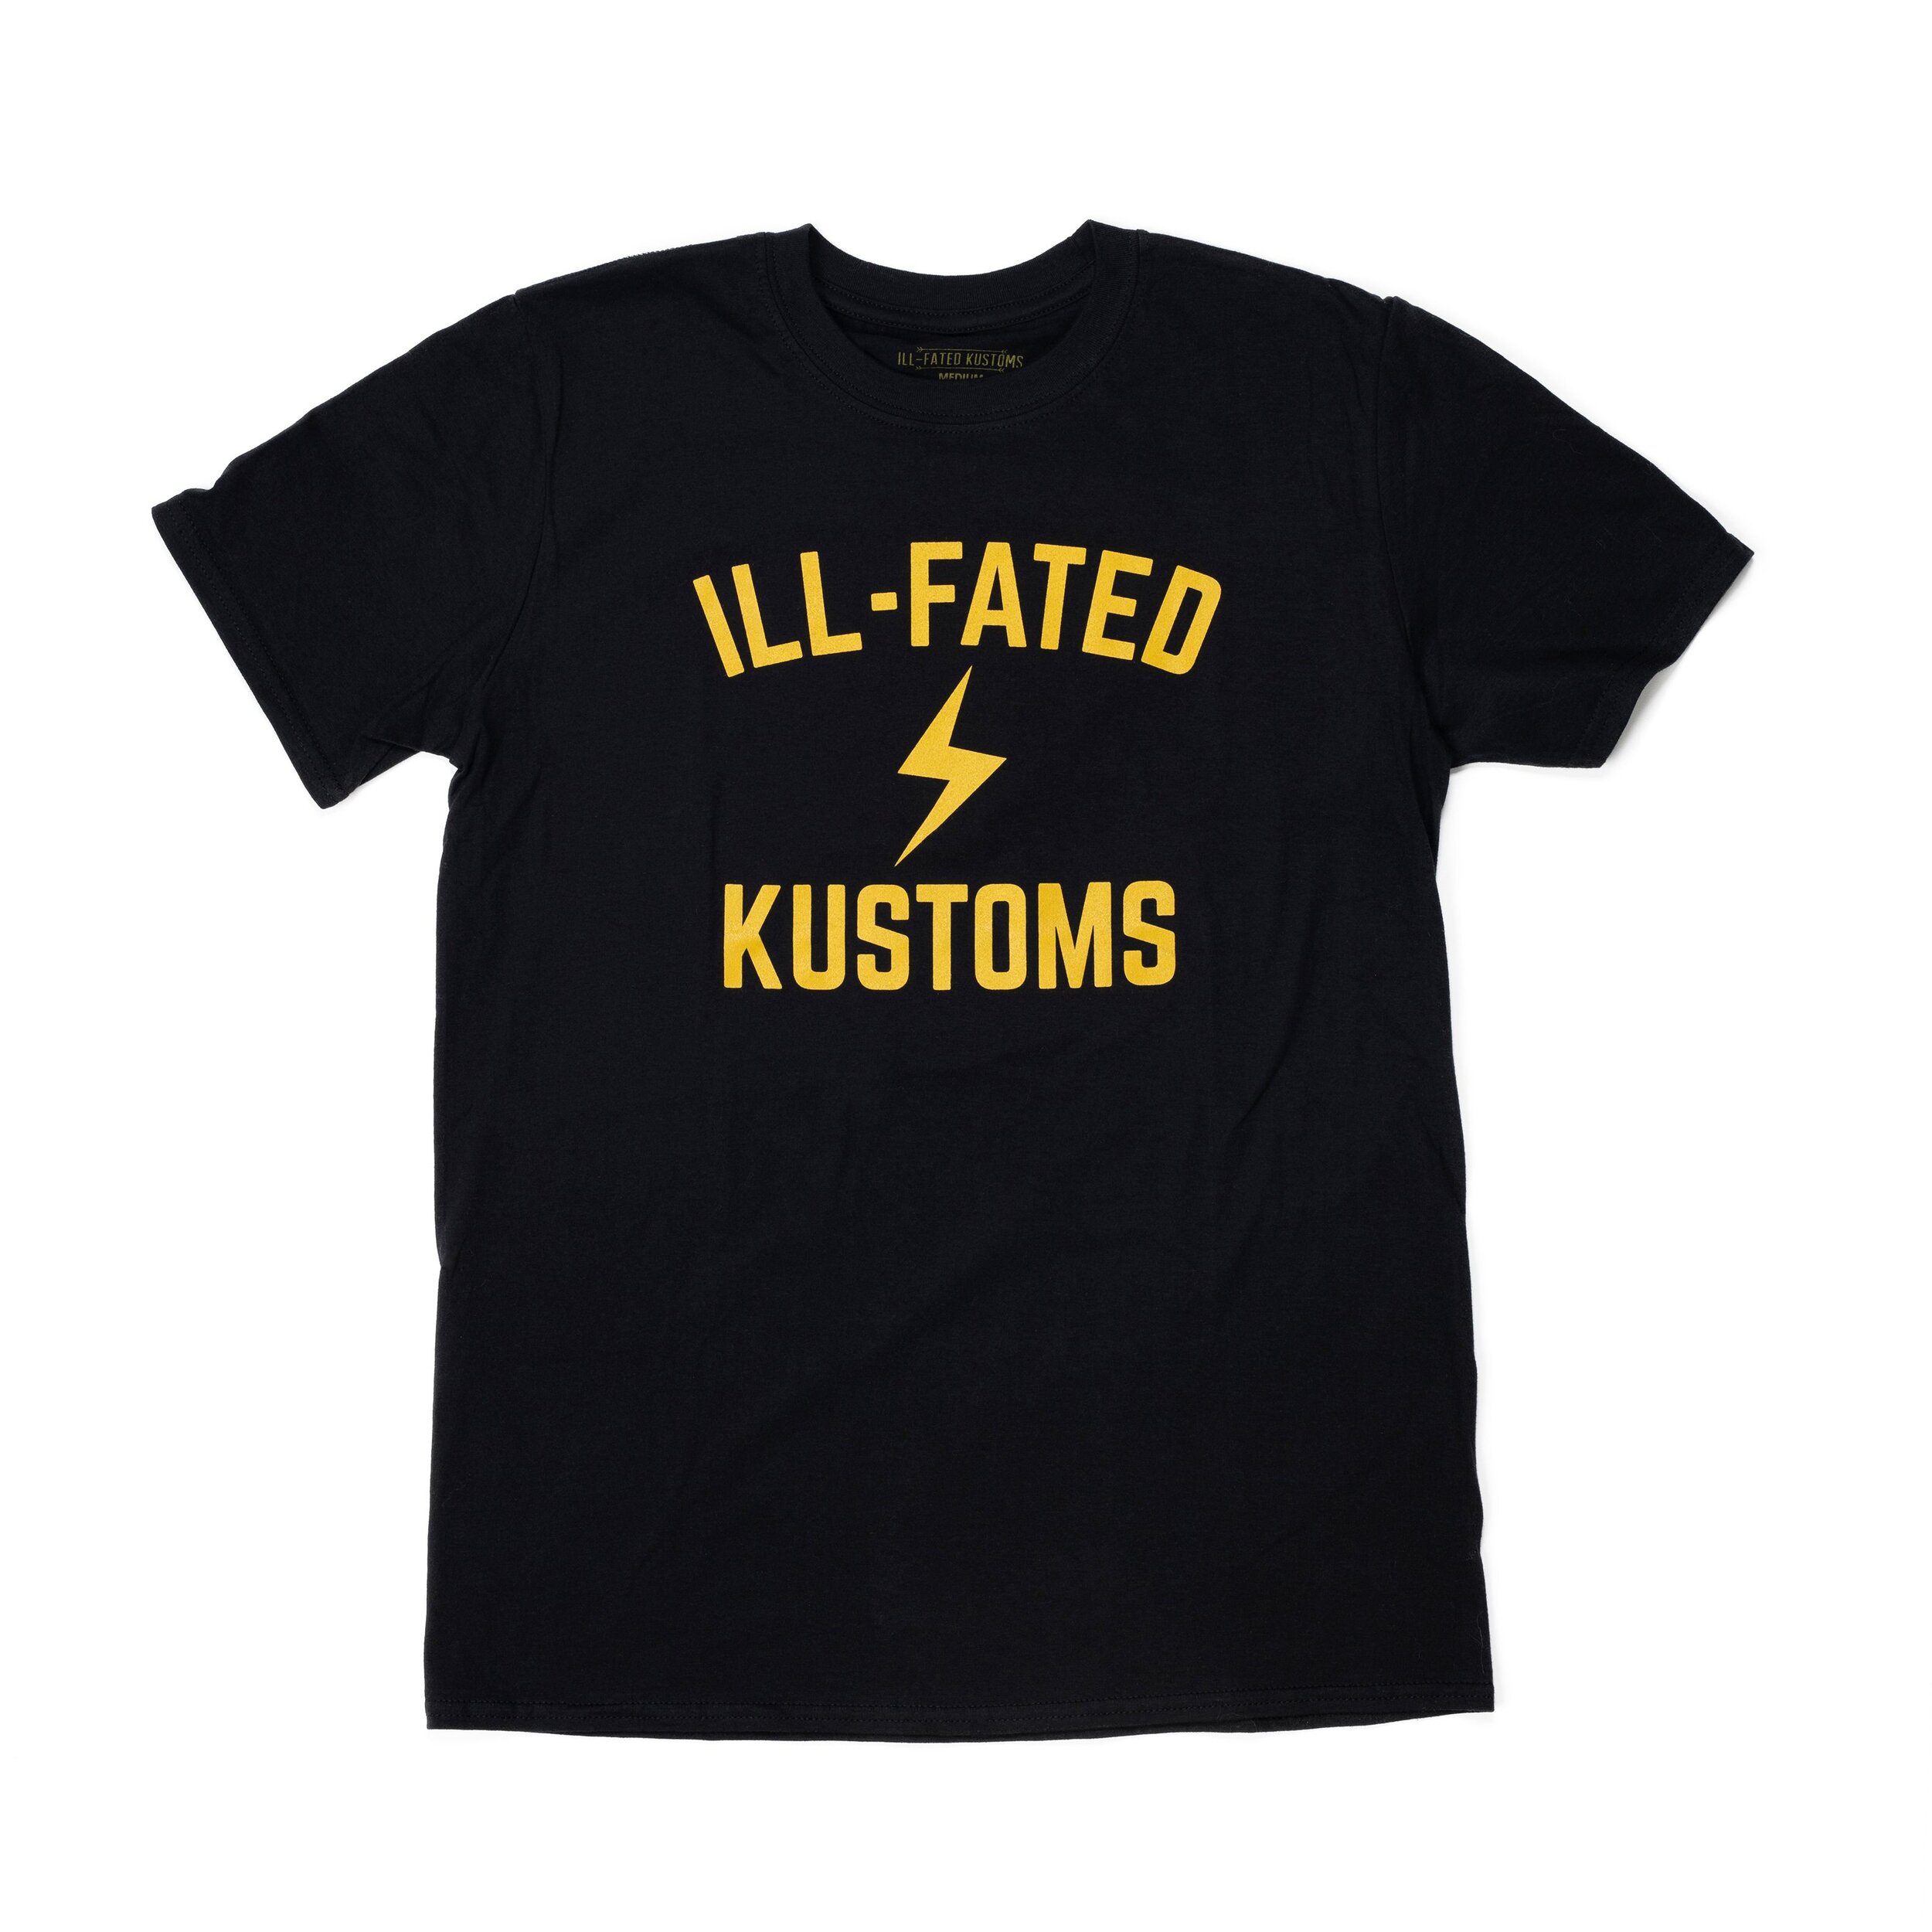 Motorcycle Lifestyle + Apparel Goods — ILL-FATED KUSTOMS